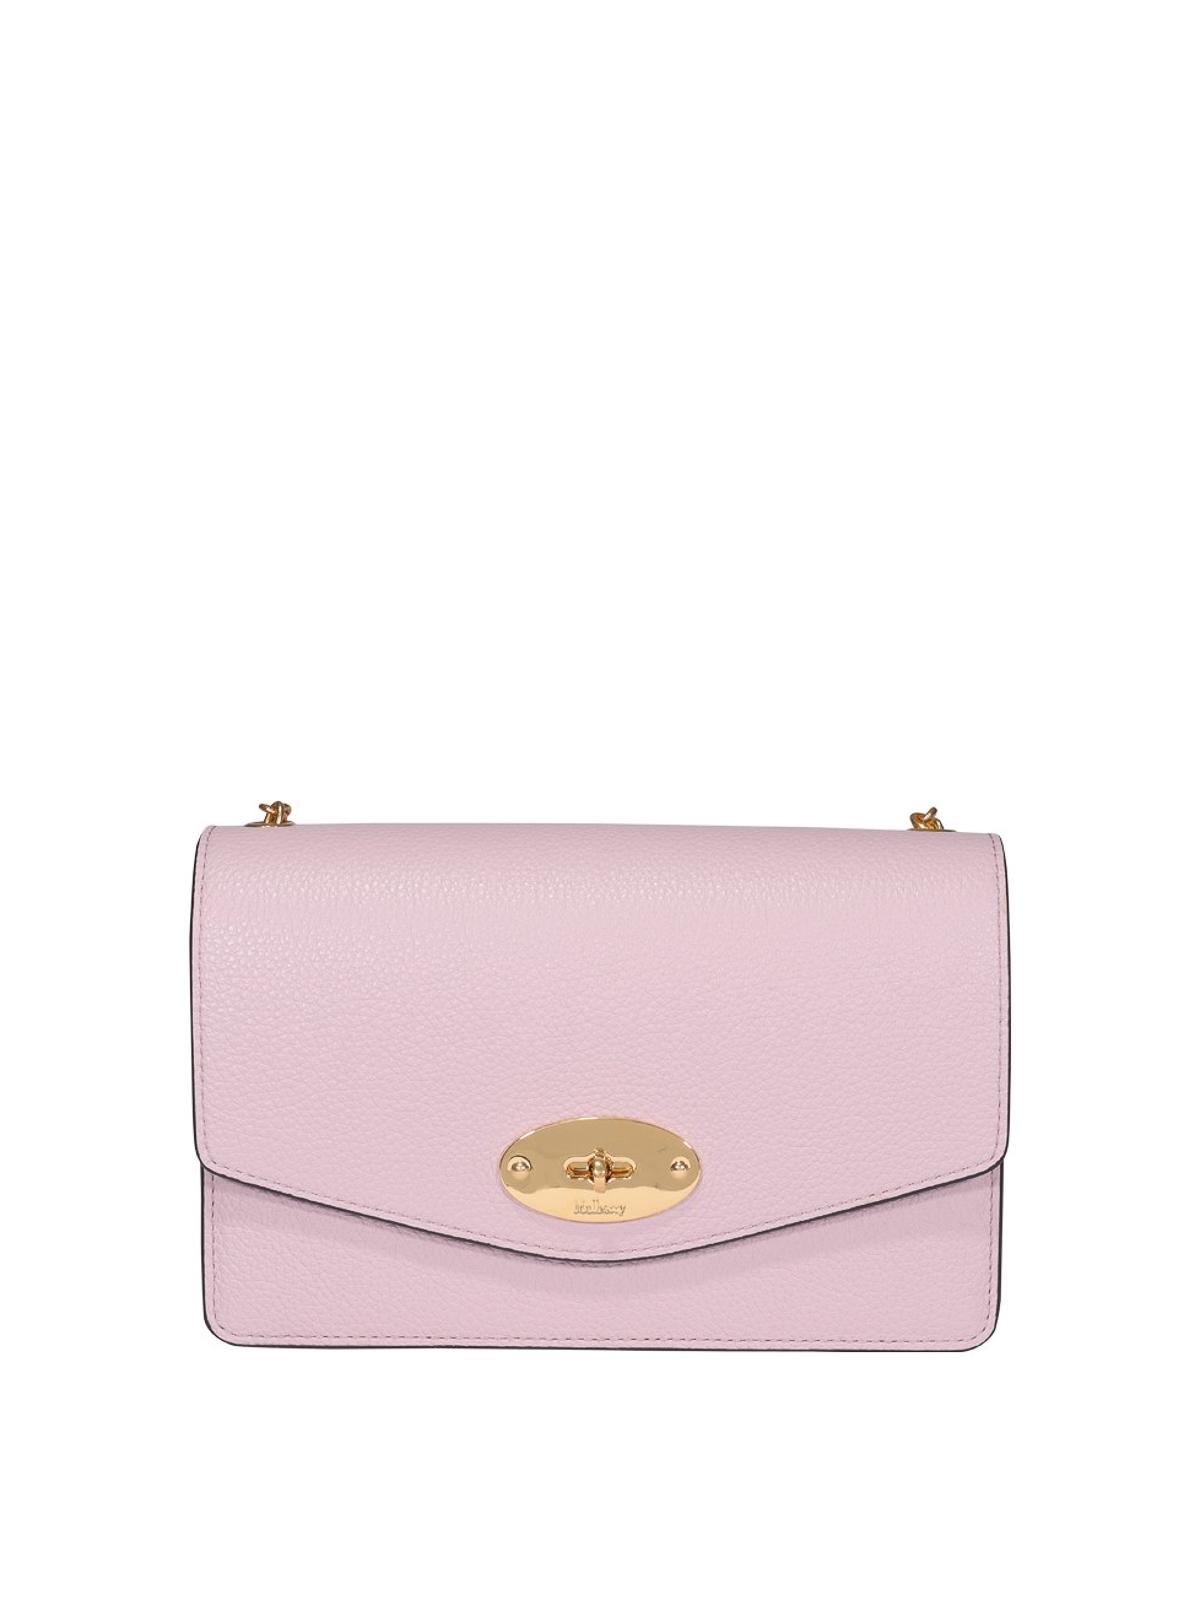 Mulberry Darley Small Leather Bag in Pink - Lyst